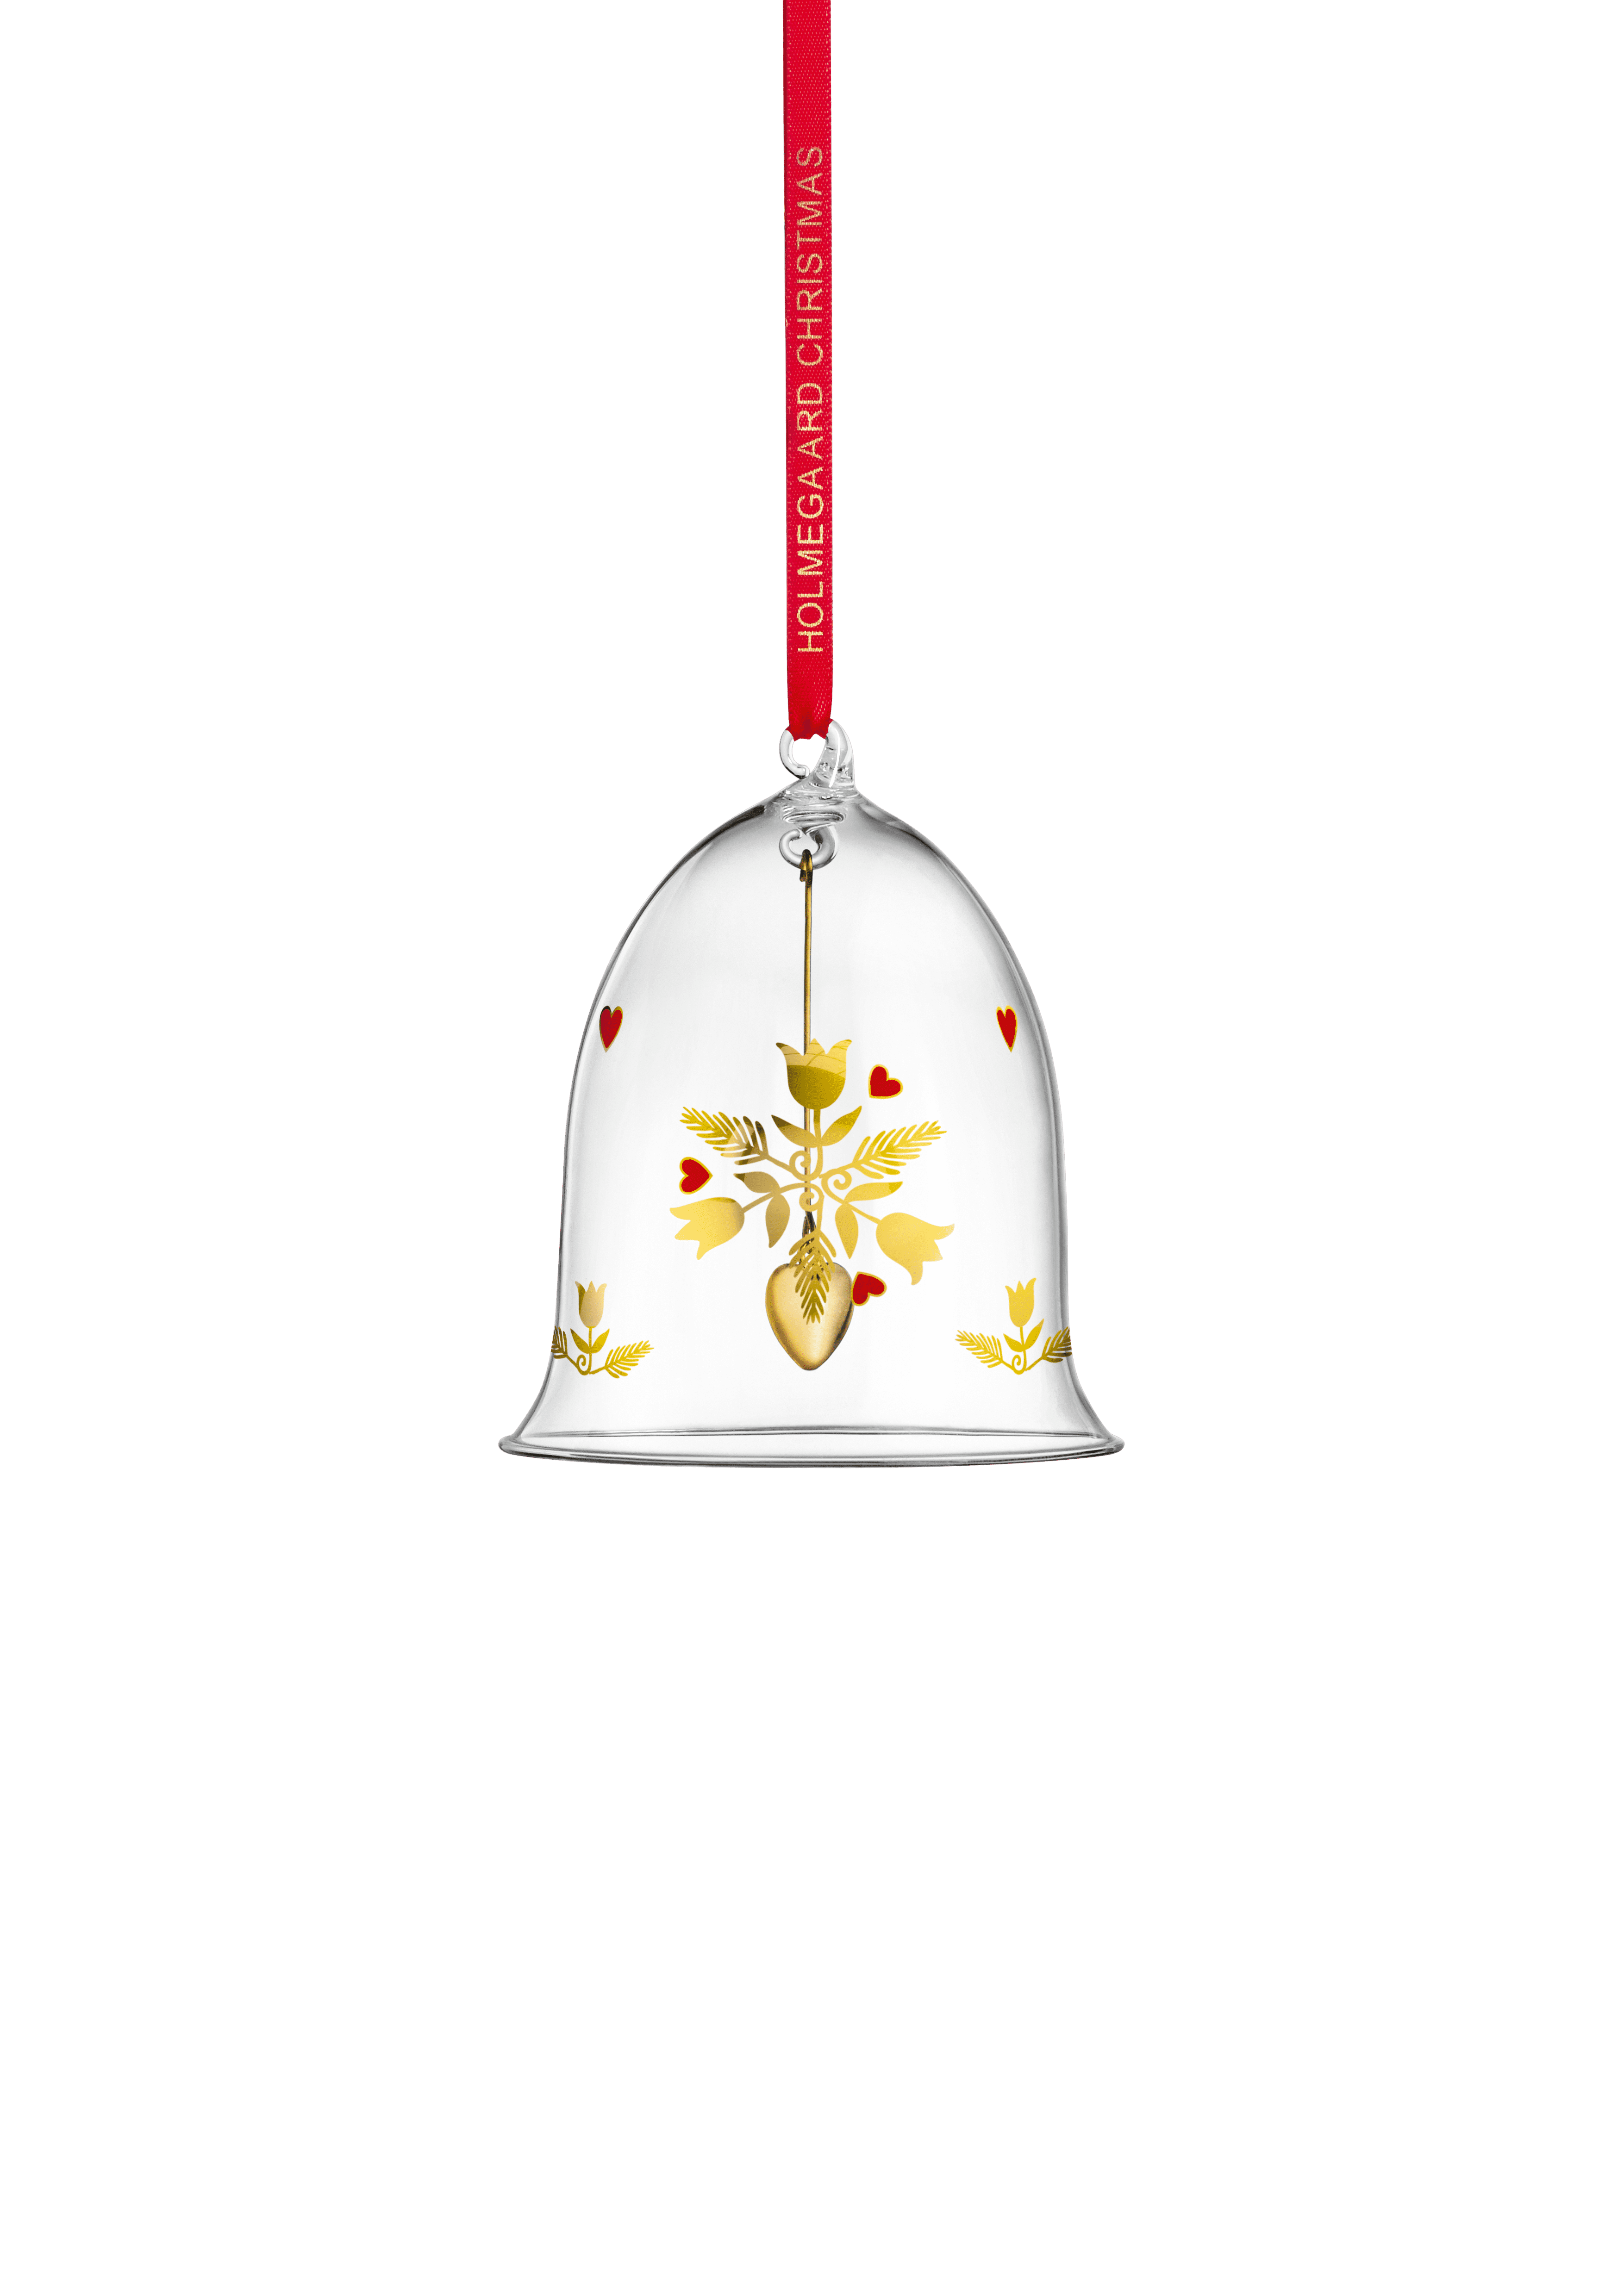 Annual Christmas Bell 2020 large